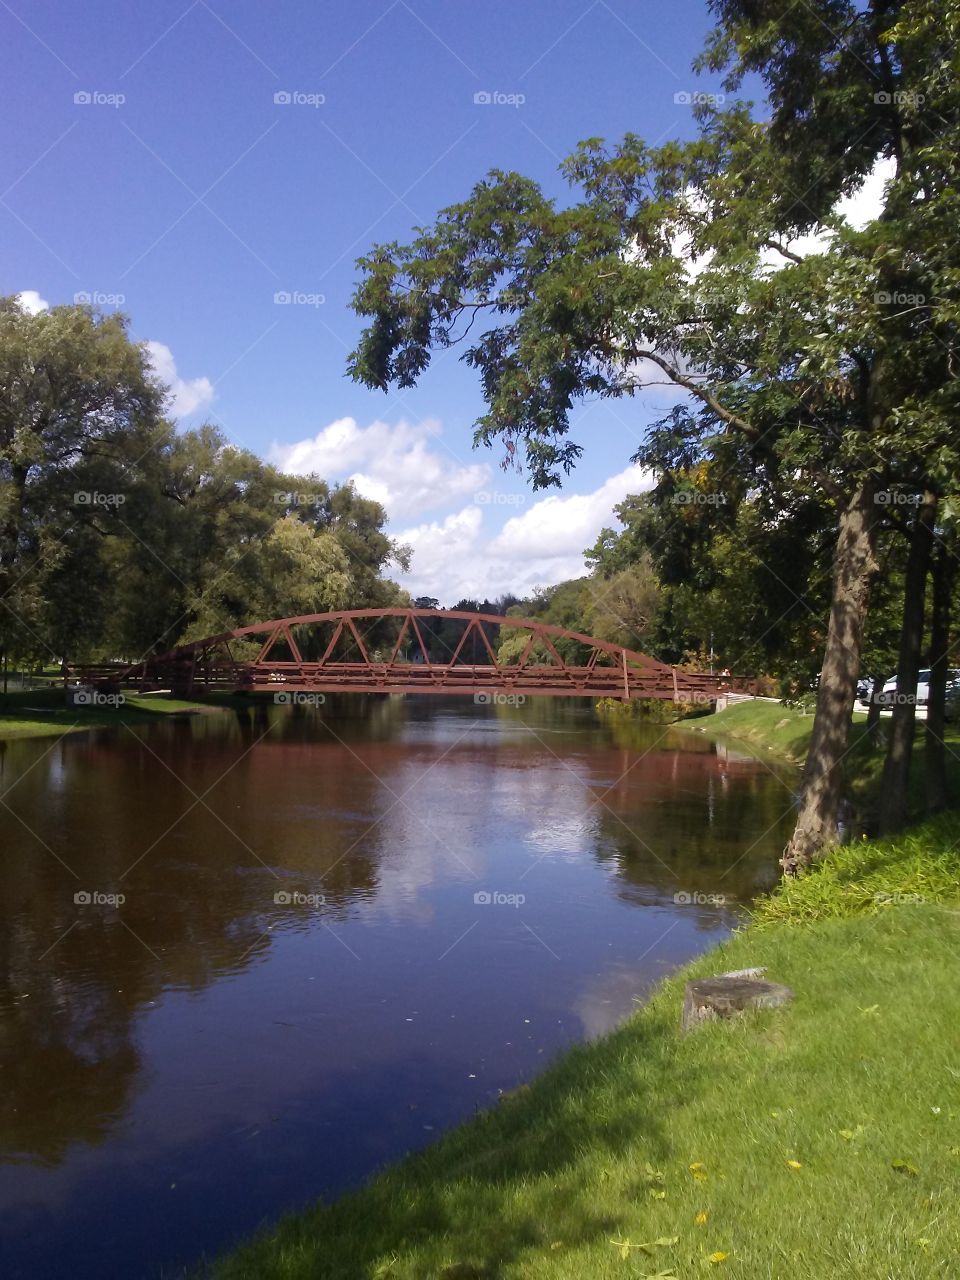 The other footbridge leading into River Park in Sheboygan Falls, Wisconsin.